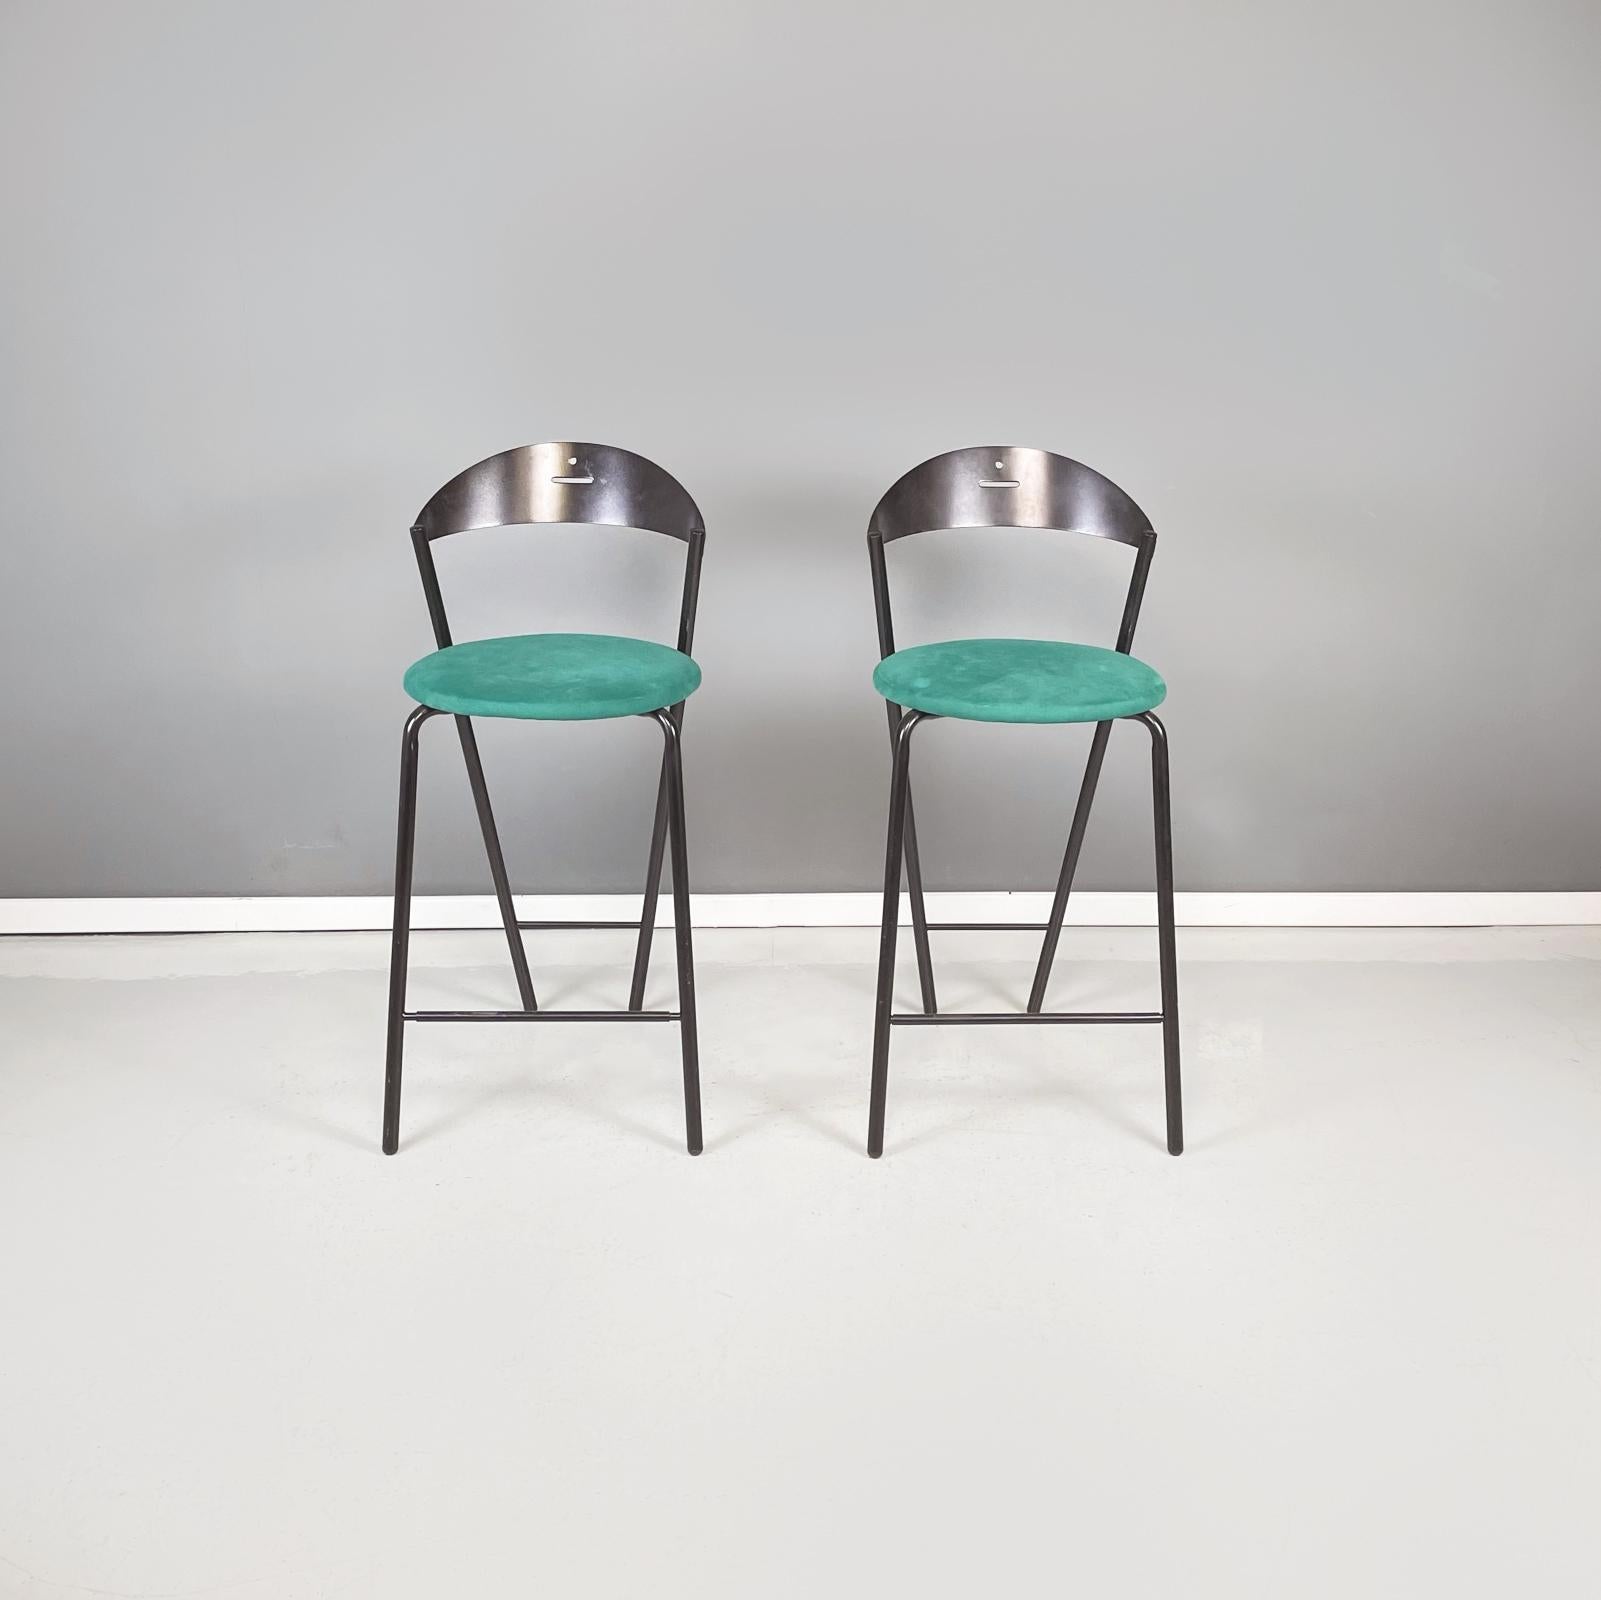 Italian modern High bar stools by Fly Line in black metal and green velvet, 1980s
Pair of high bar stools with round seat in aquamarine green velvet. The backrest is in curved and black painted metal. The legs of the stool are in black painted